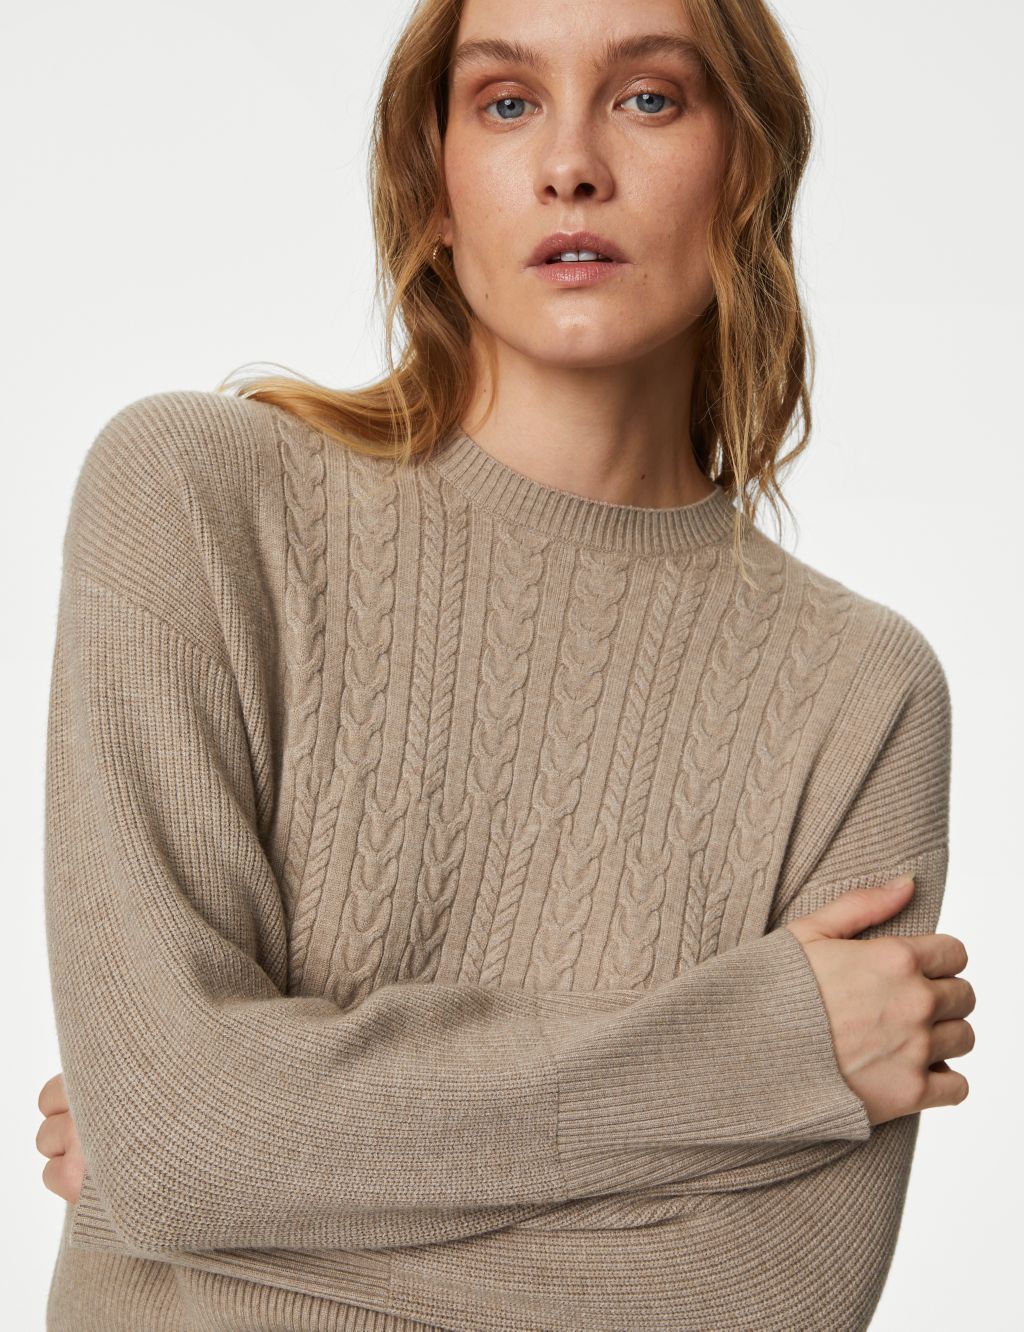 Soft Touch Textured Crew Neck Jumper image 1